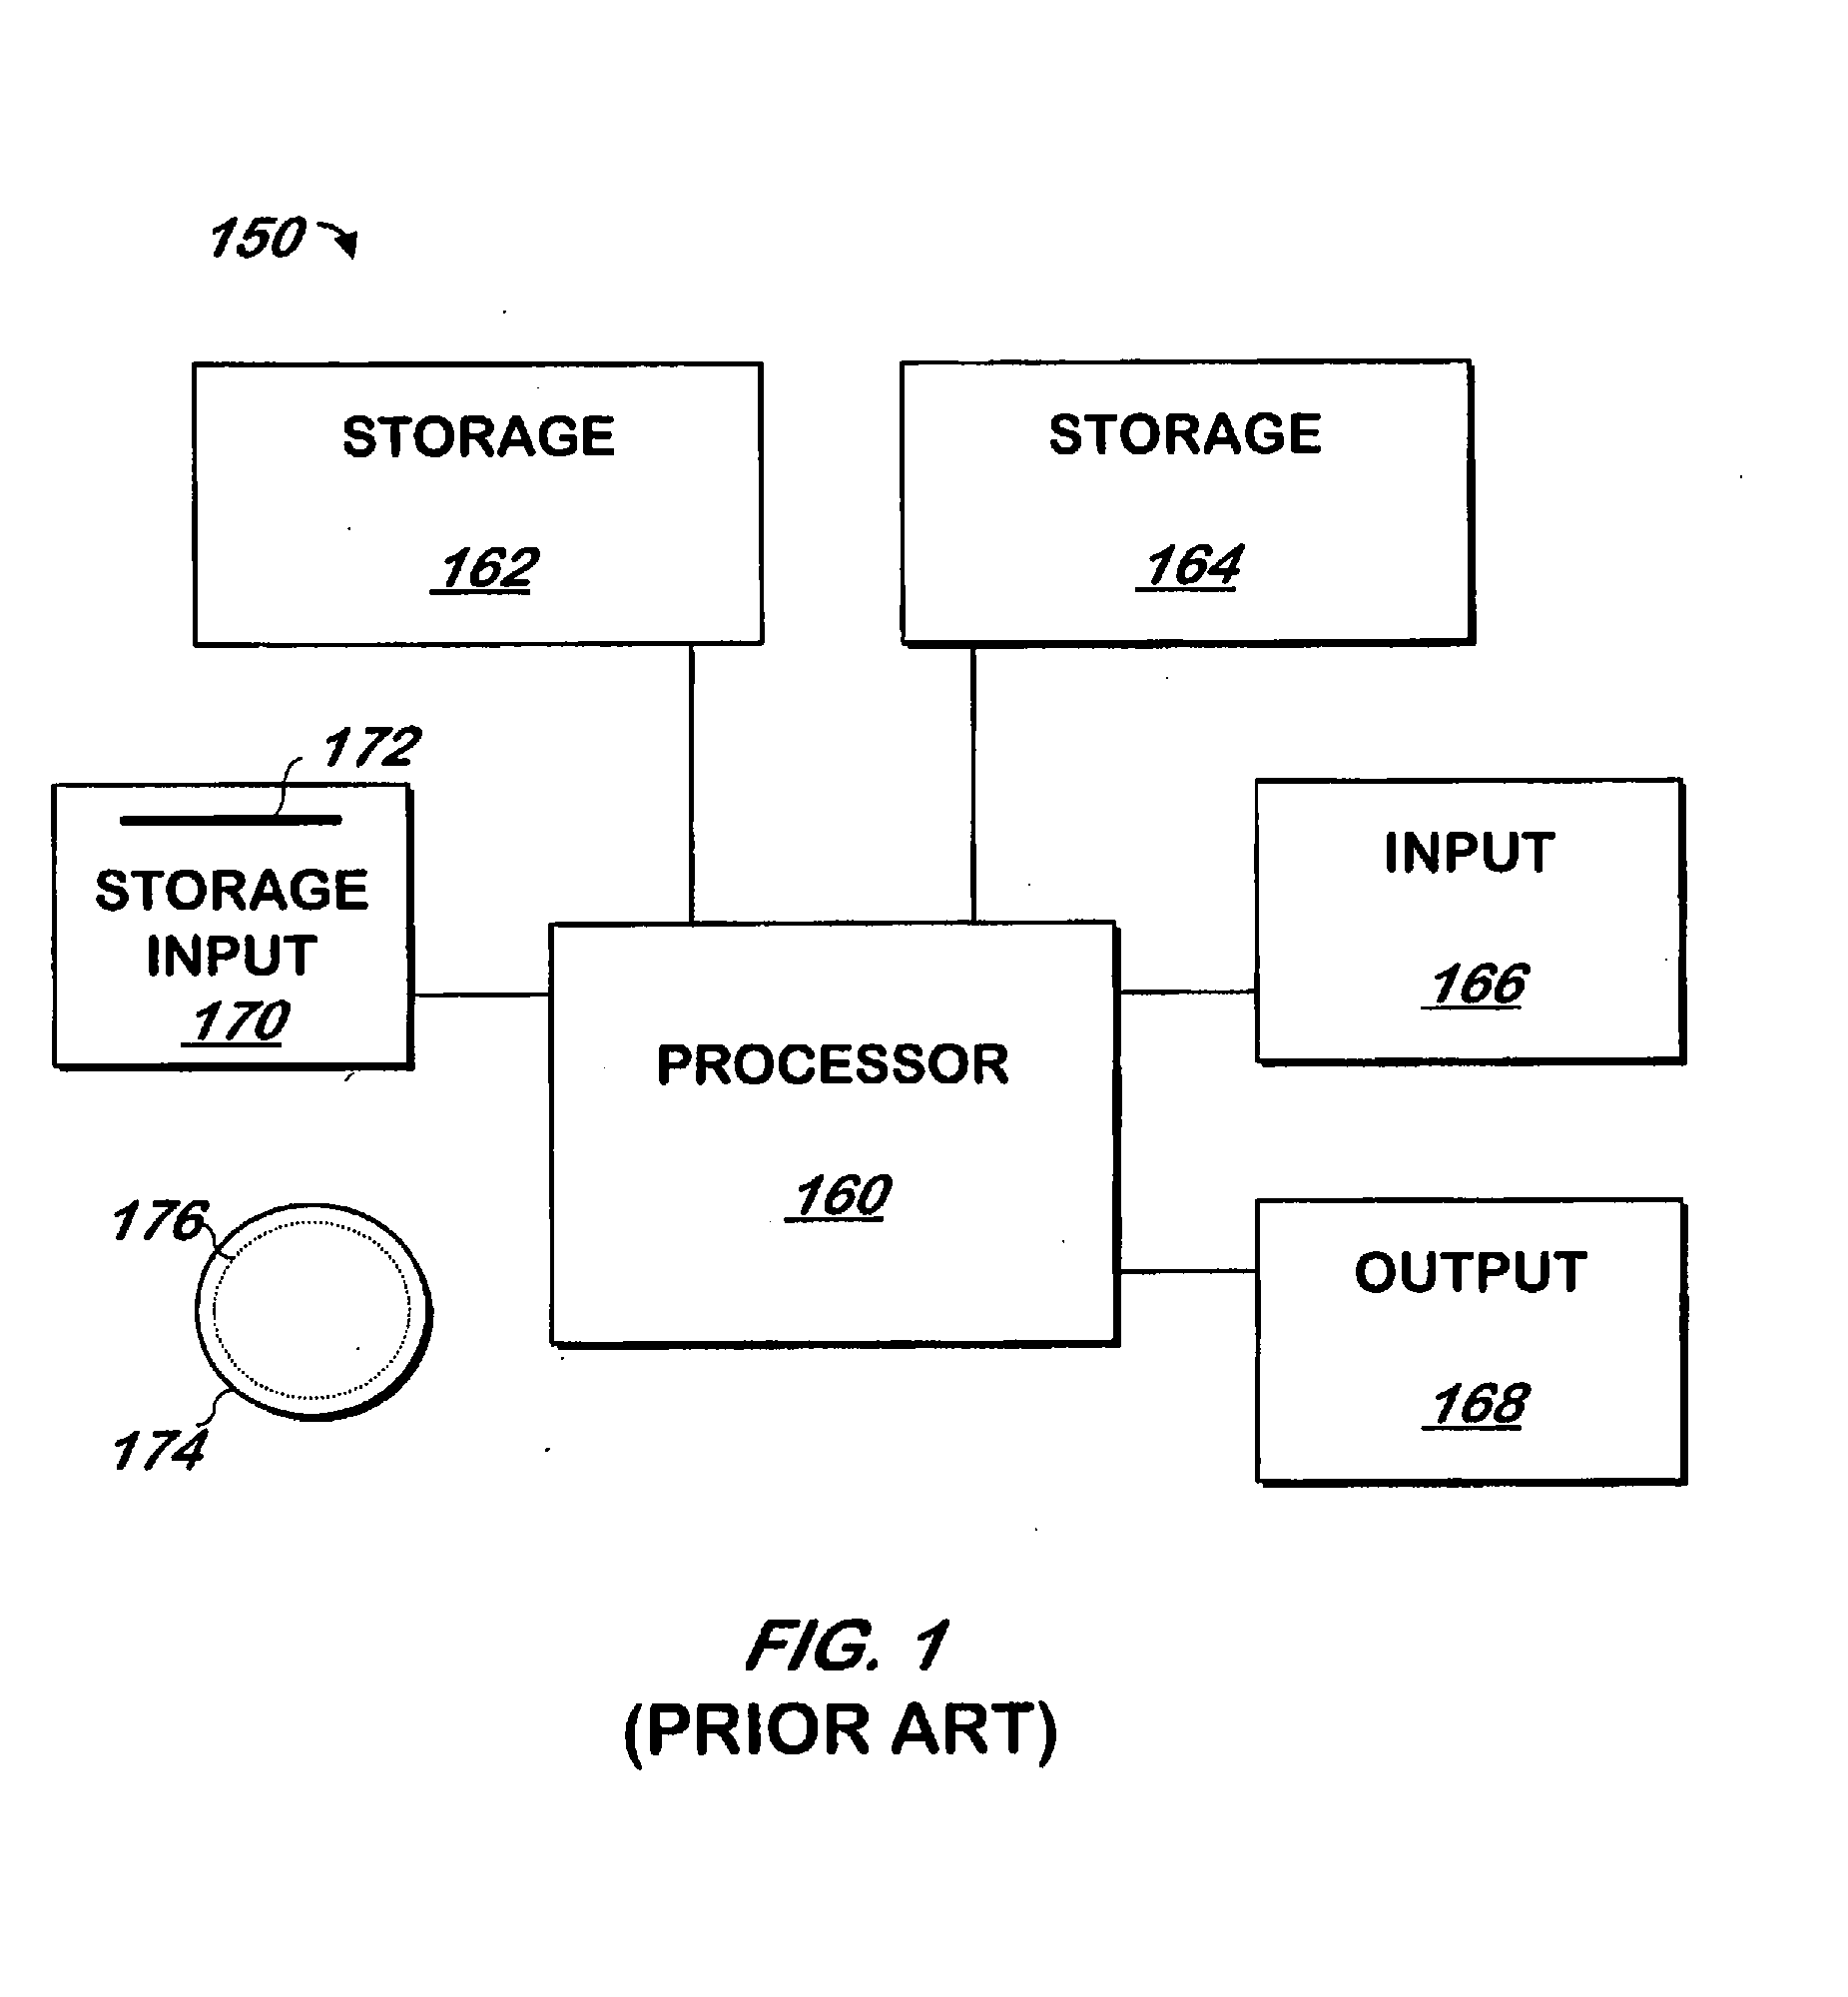 System and method for allocating communications to processors and rescheduling processes in a multiprocessor system